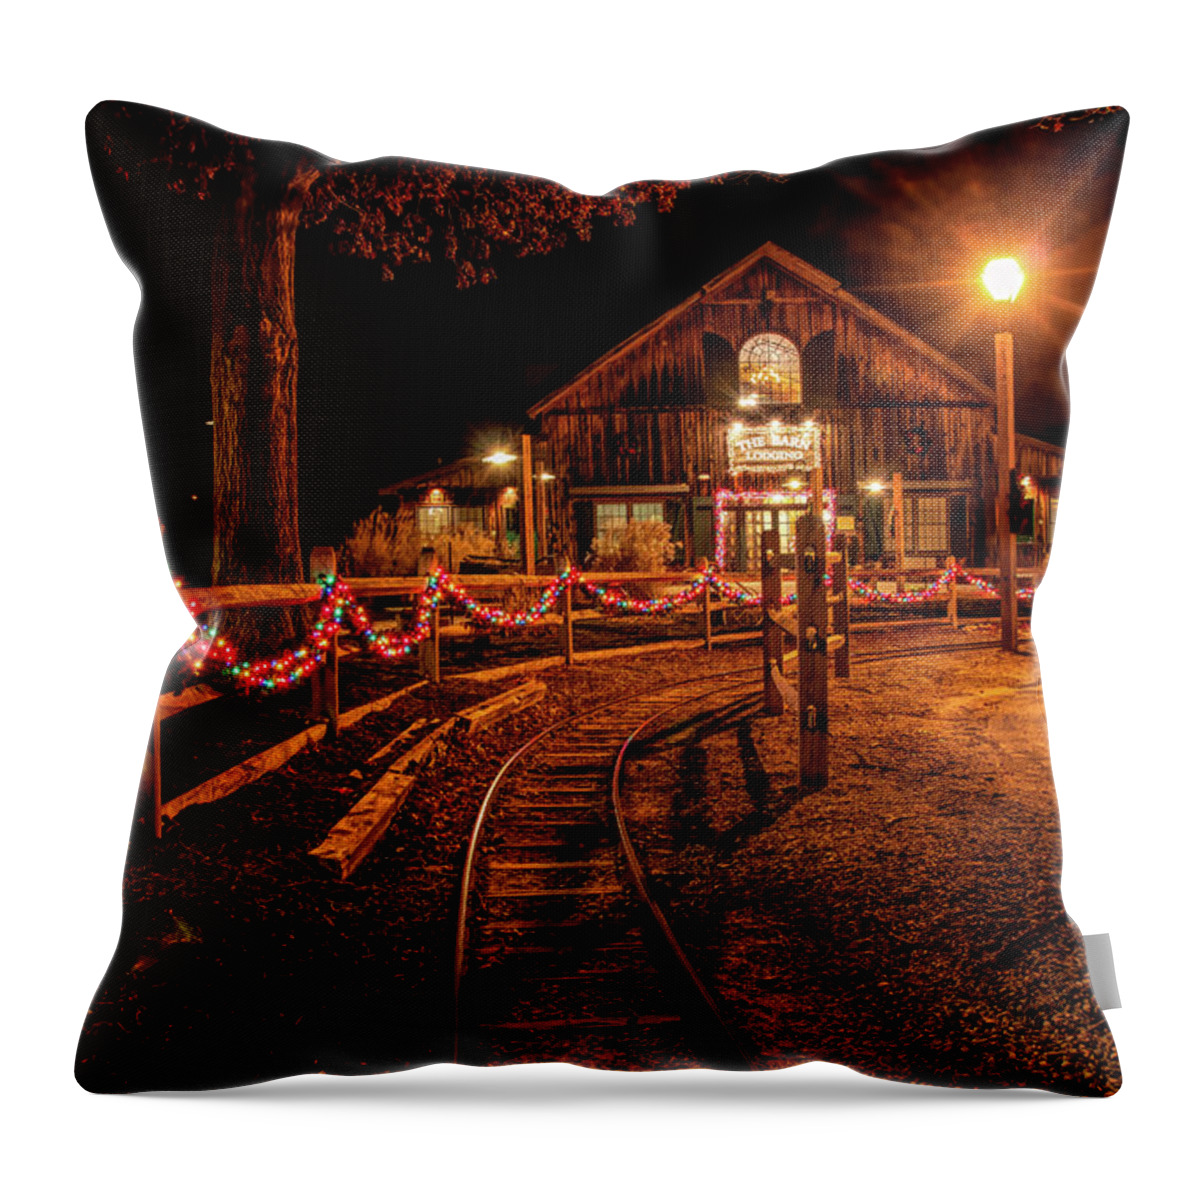 Smithville Throw Pillow featuring the photograph Christmas At The Barn In Smithville by Kristia Adams